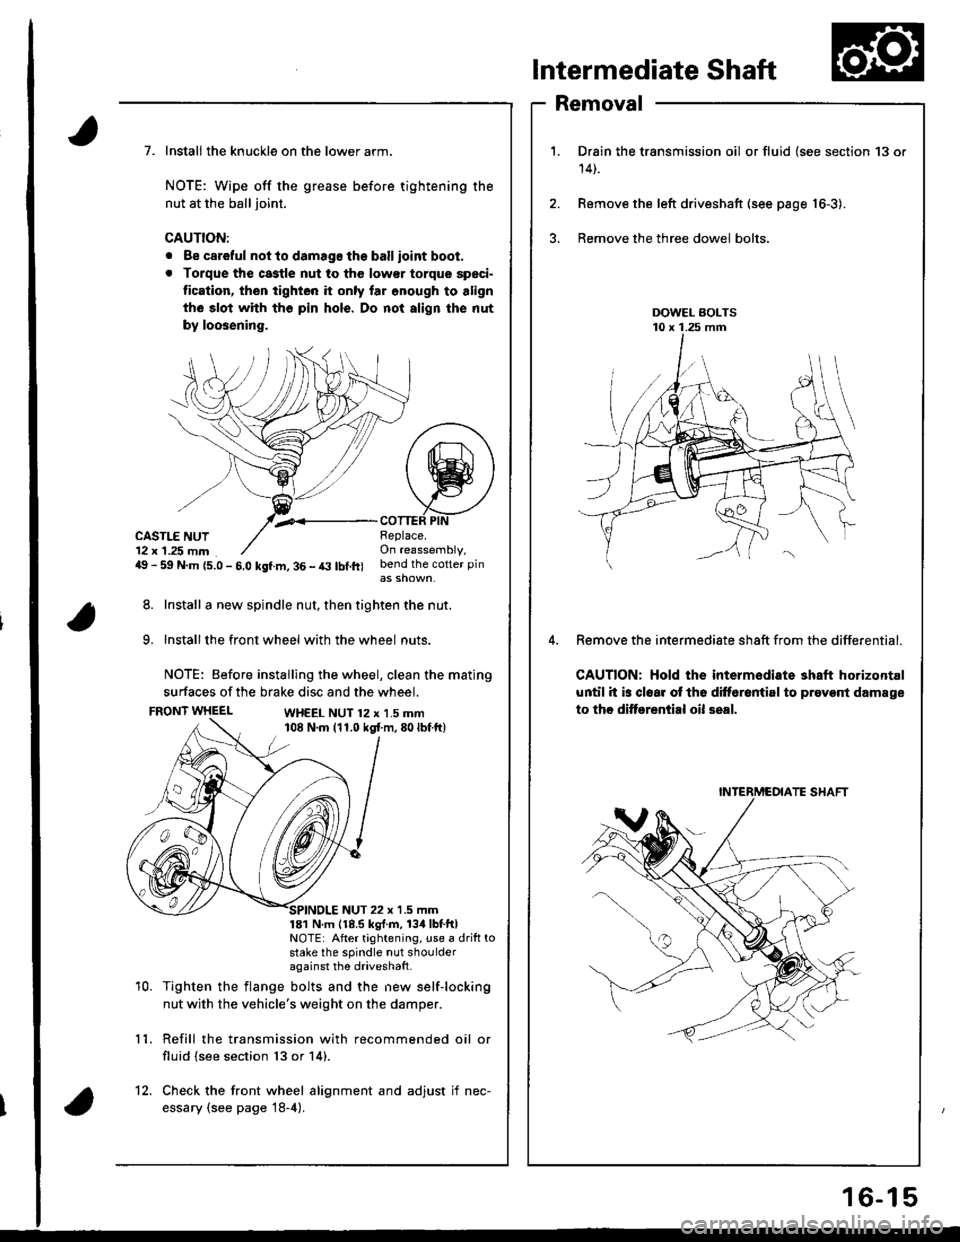 HONDA INTEGRA 1998 4.G Workshop Manual Intermediate Shaft
Removal
Drain the transmission oil or fluid {see section 13 or
14t.
Remove the left driveshaft (see page 16-3).
Bemove the three dowel bolts.
Remove the intermediate sh8ft from the 